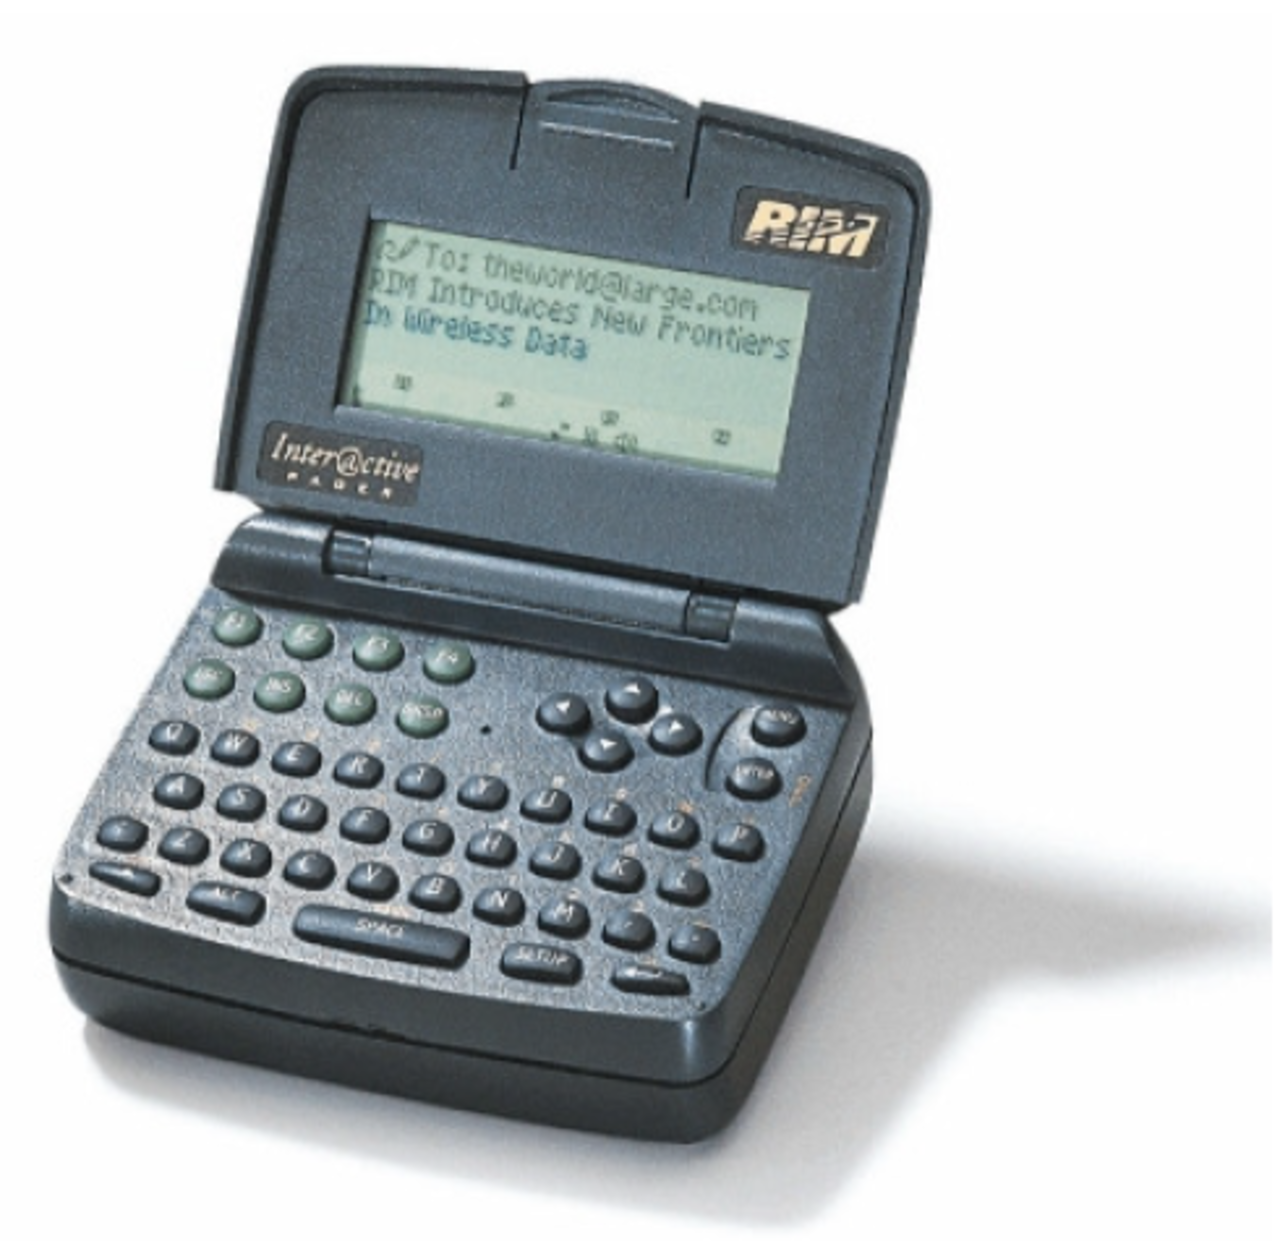 The BlackBerry's closest predecessor, this clamshell device introduced in 1996, was the first two-way messaging pager.